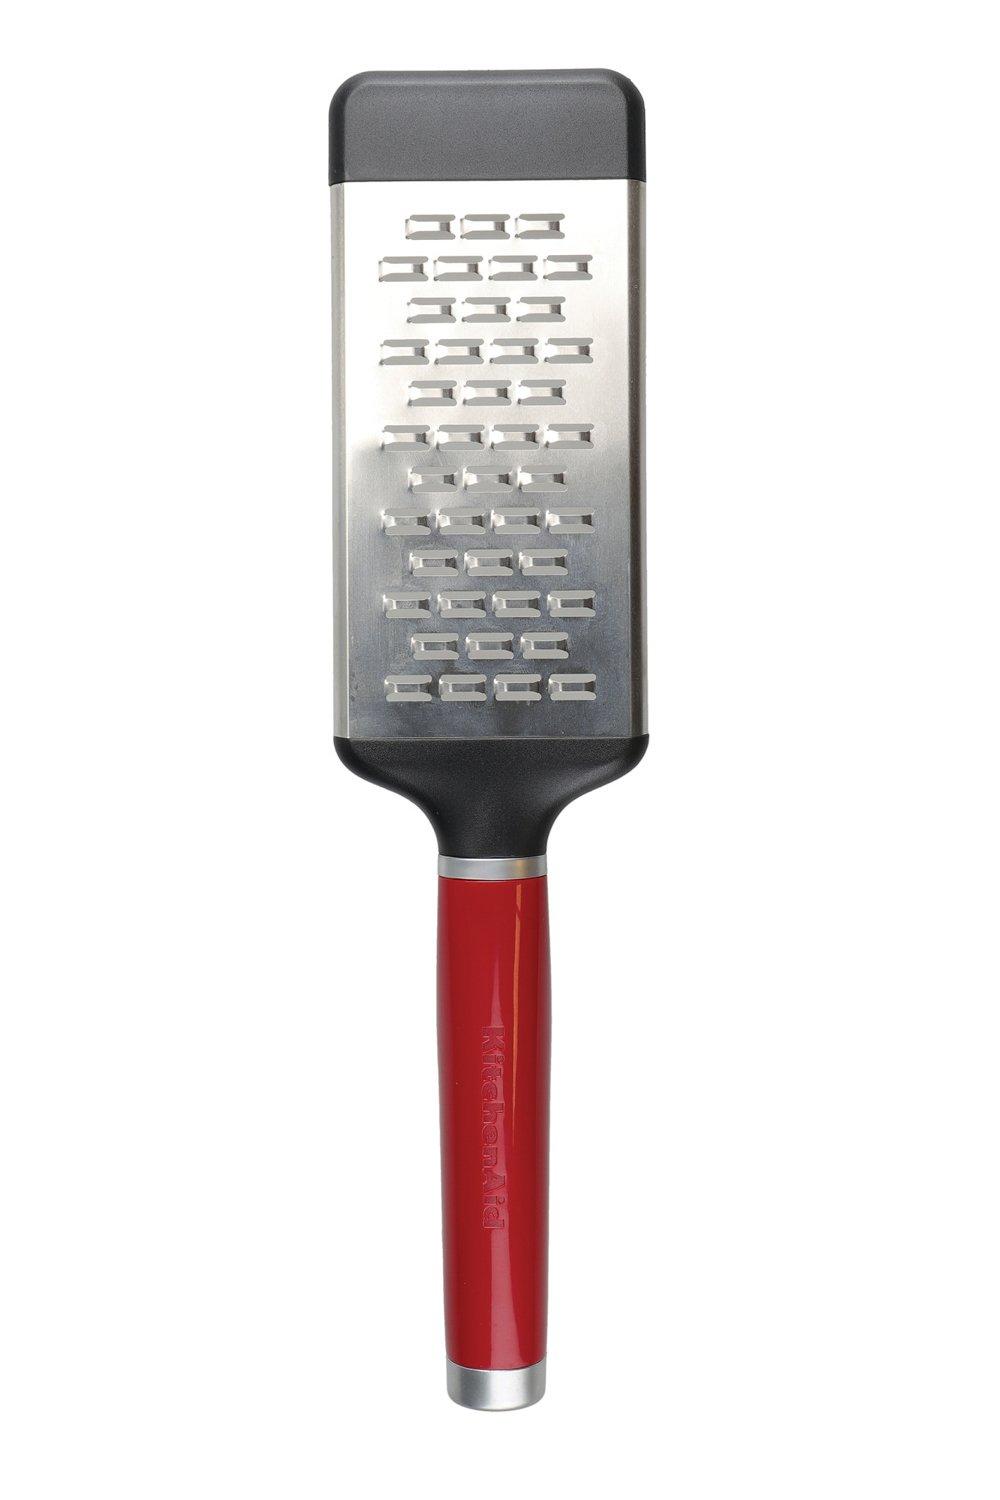 etched cheese grater - empire red